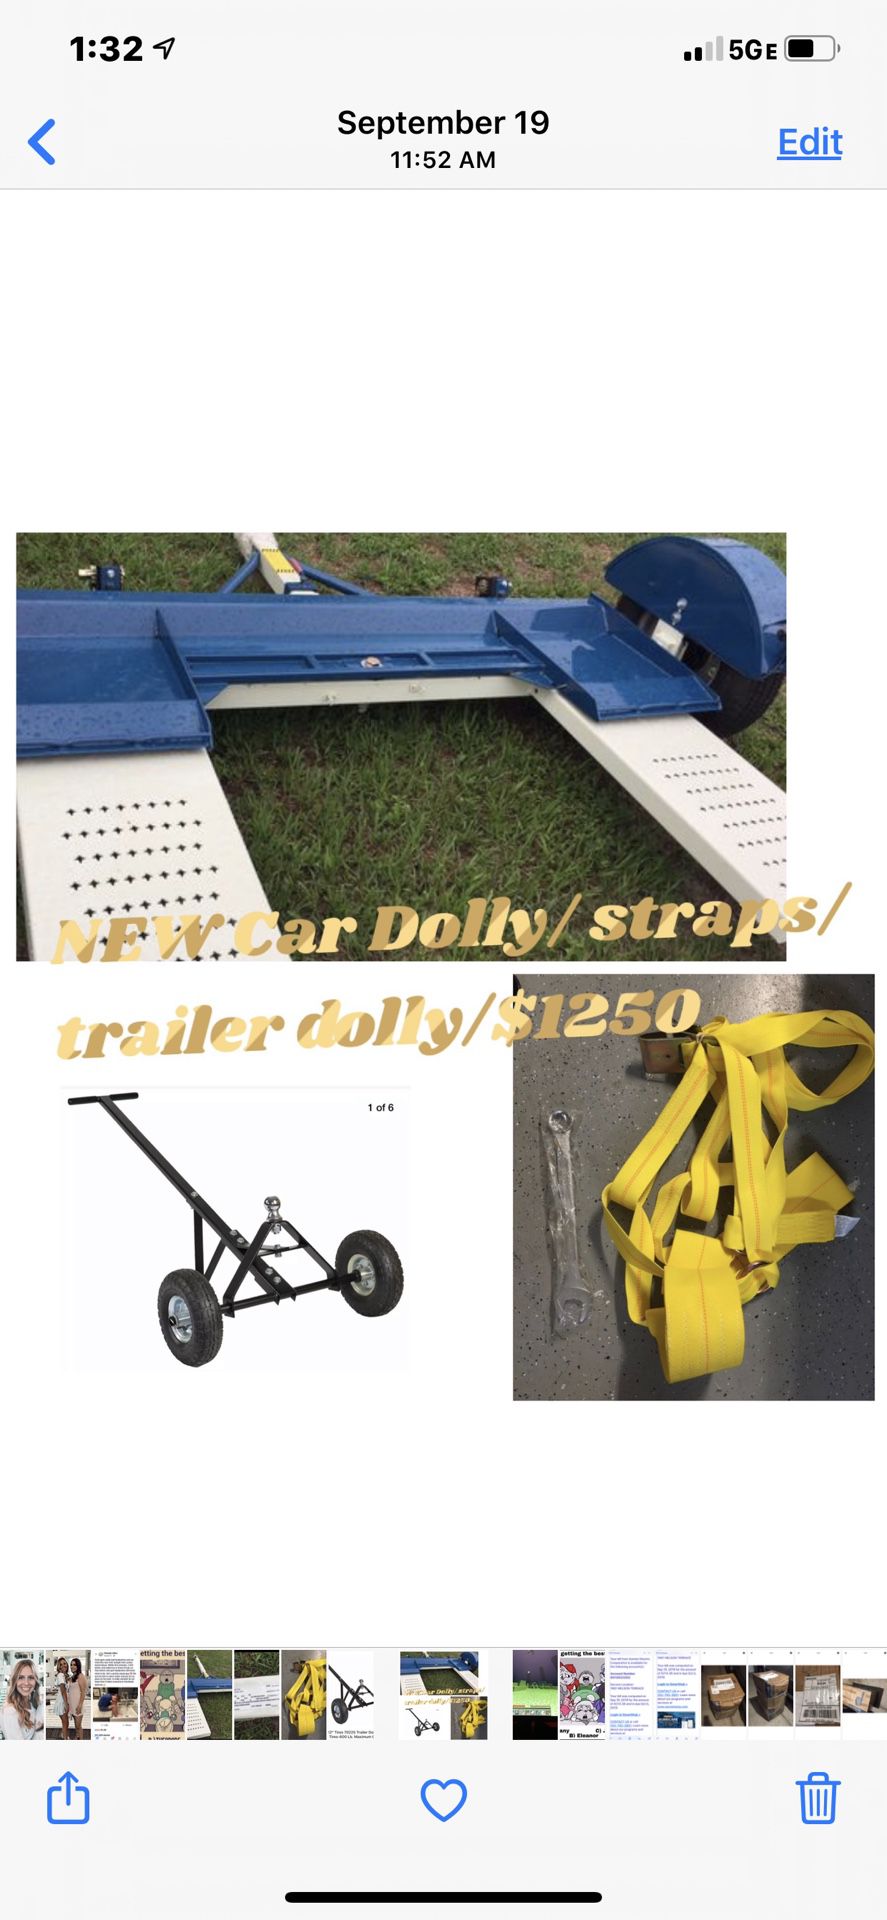 Brand NEW car dolly, straps, and hitch dolly-$1150